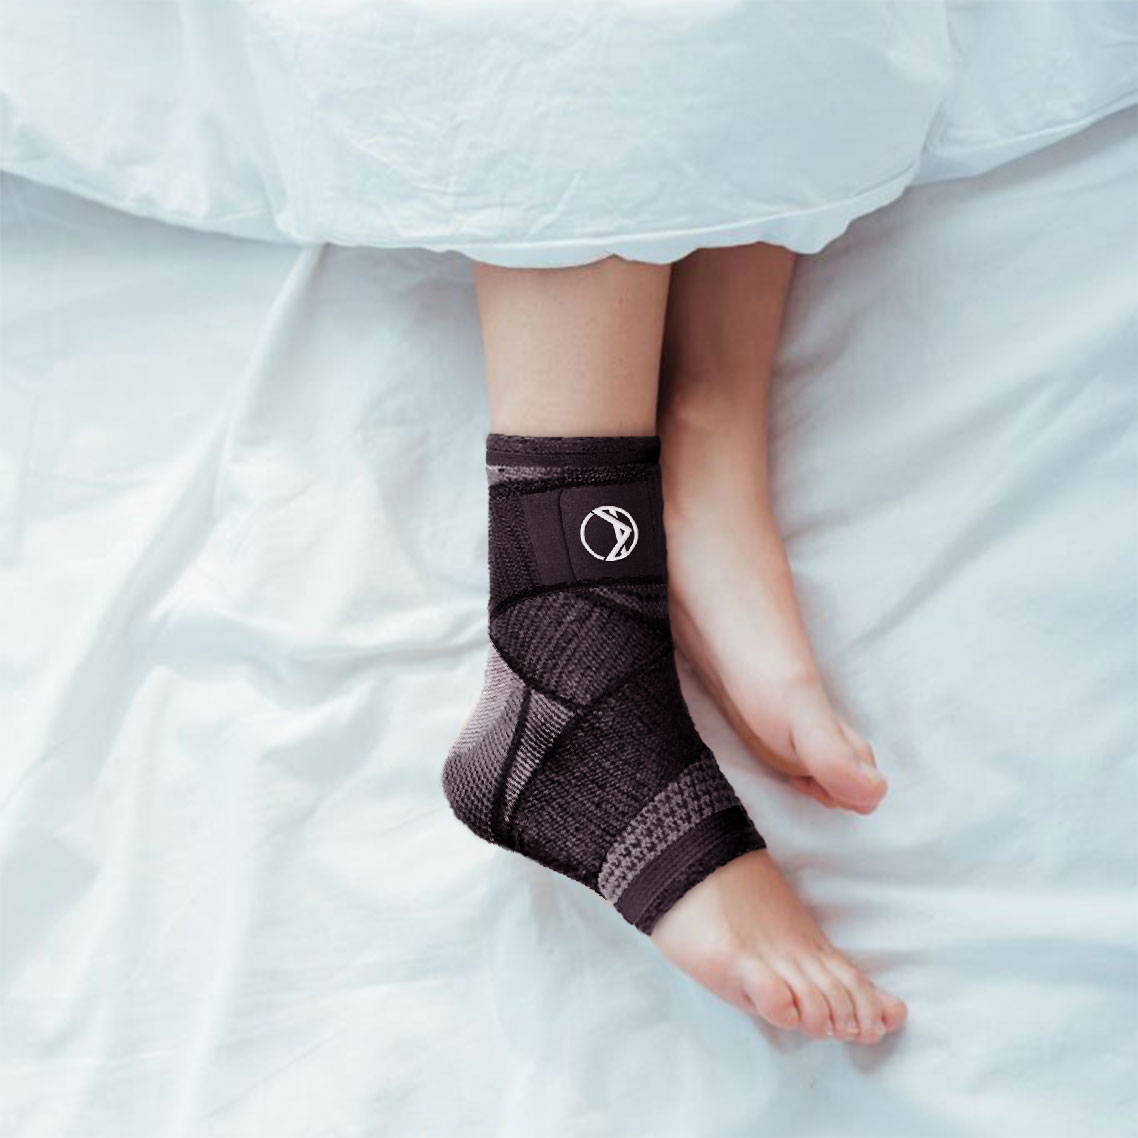 Wearing plantar fasciitis sleeve at night helps reduce inflammation and swelling, which in turn helps alleviate pain. You can also use this as an arch sleeve for plantar fasciitis during the day.